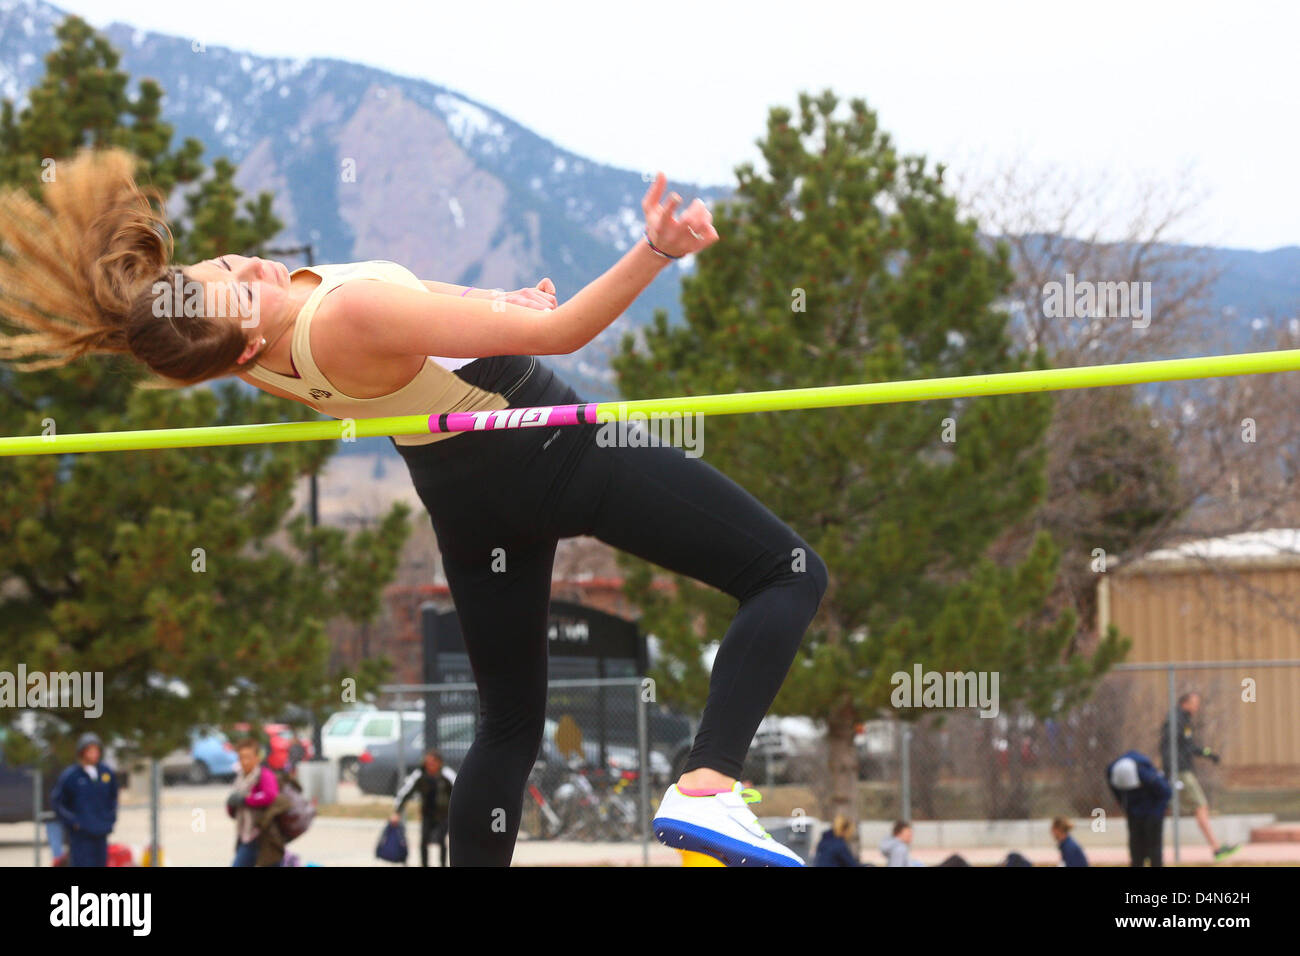 March 16, 2013 - Boulder, CO, United States of America - March 16, 2013: Colorado's Ewelina Pena competes in the women's high jump at the inaugural Jerry Quiller Classic at the University of Colorado campus in Boulder. Stock Photo